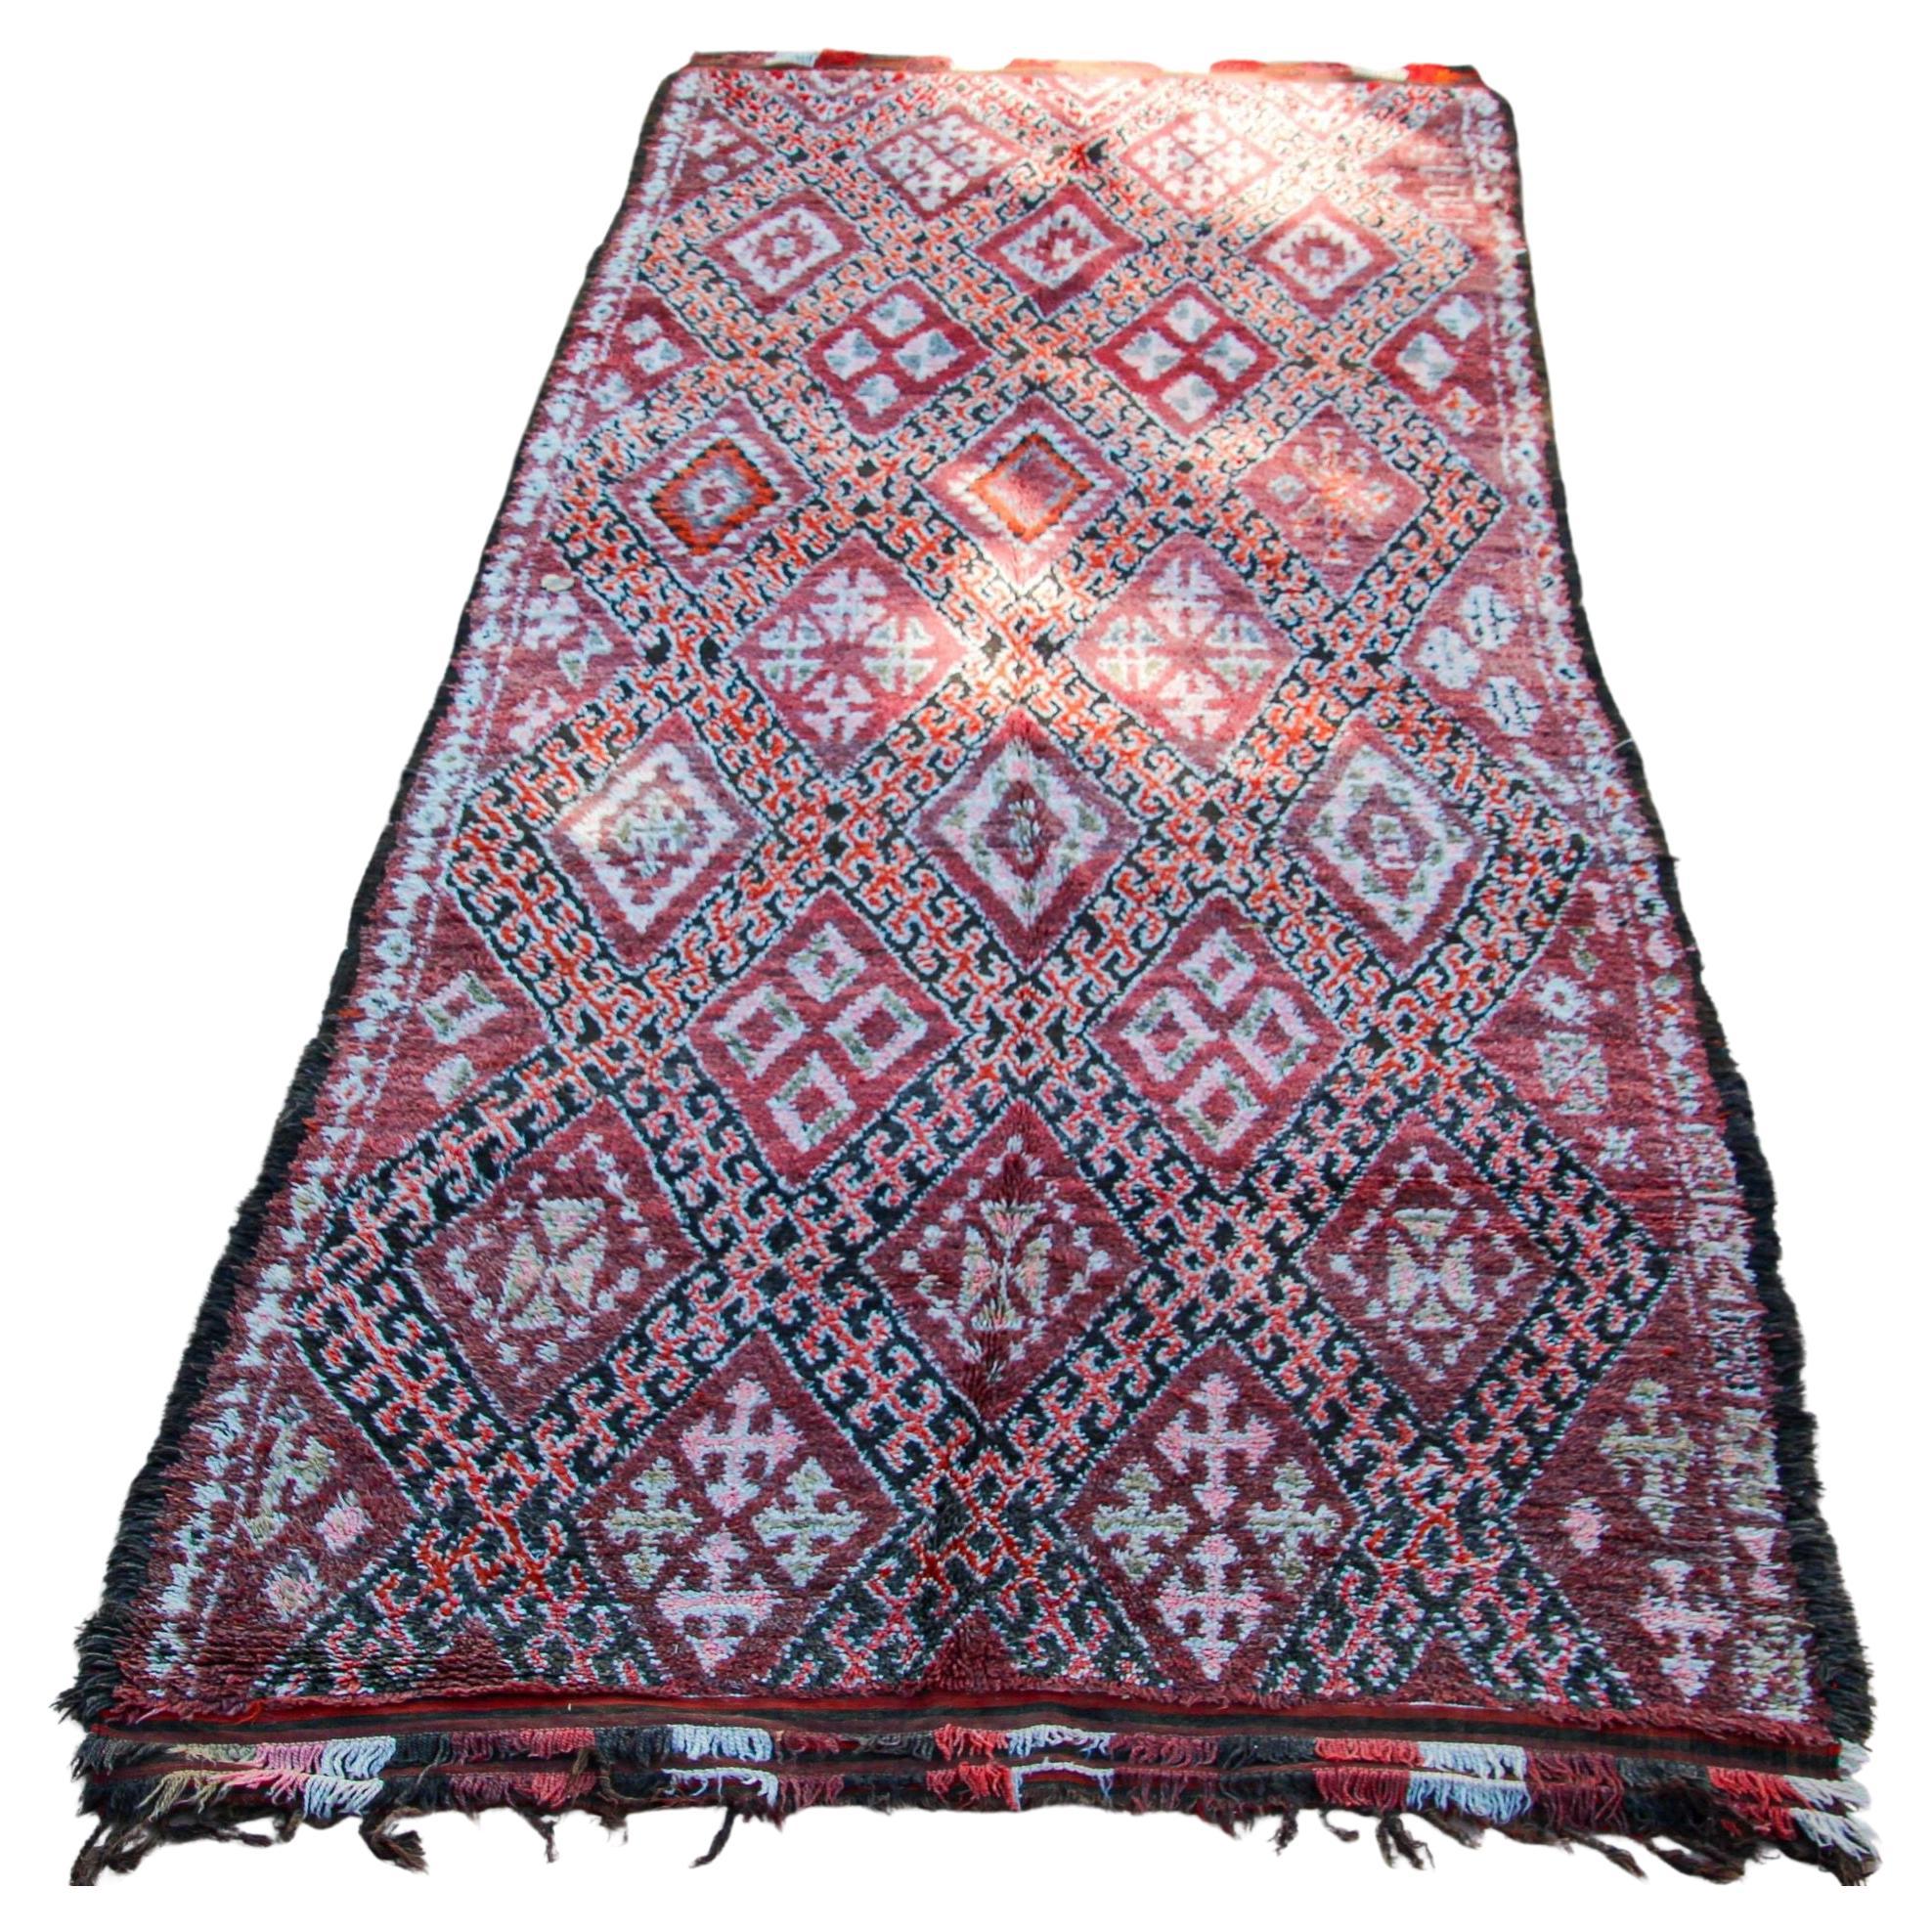 What is a Berber style rug?